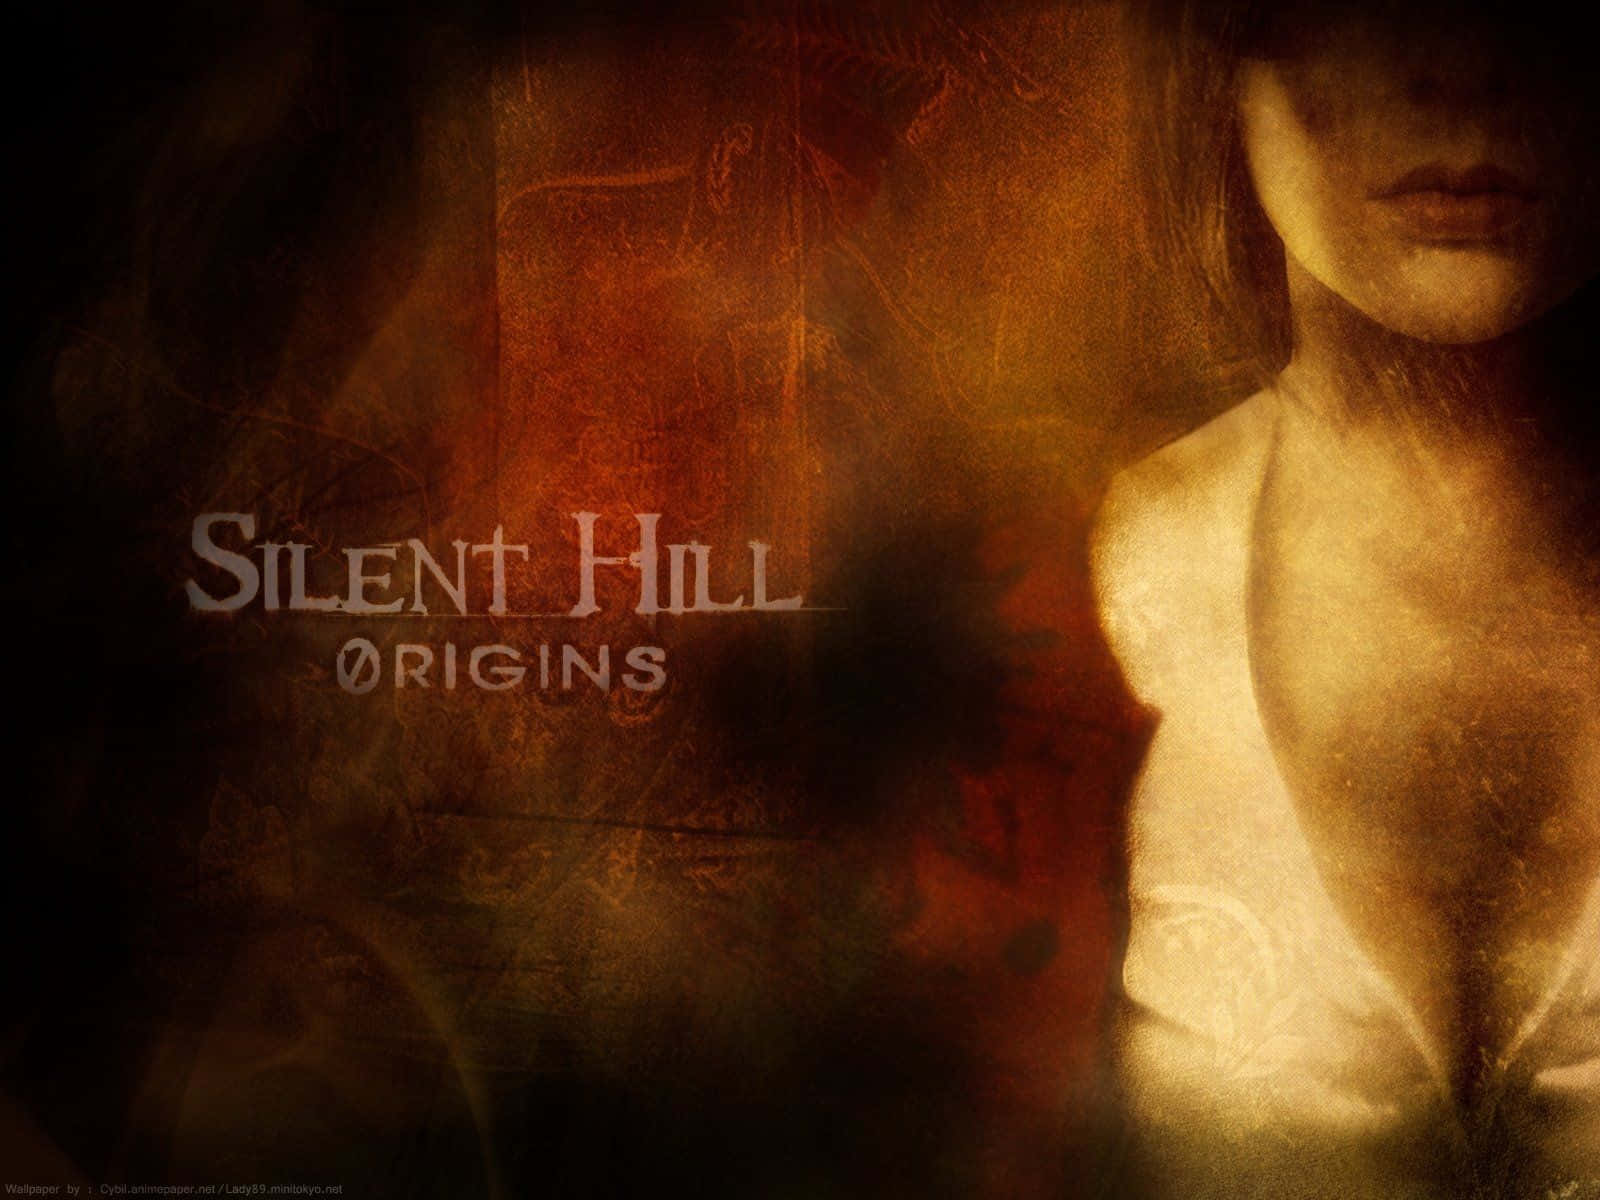 Fog shrouds the mysterious town of Silent Hill